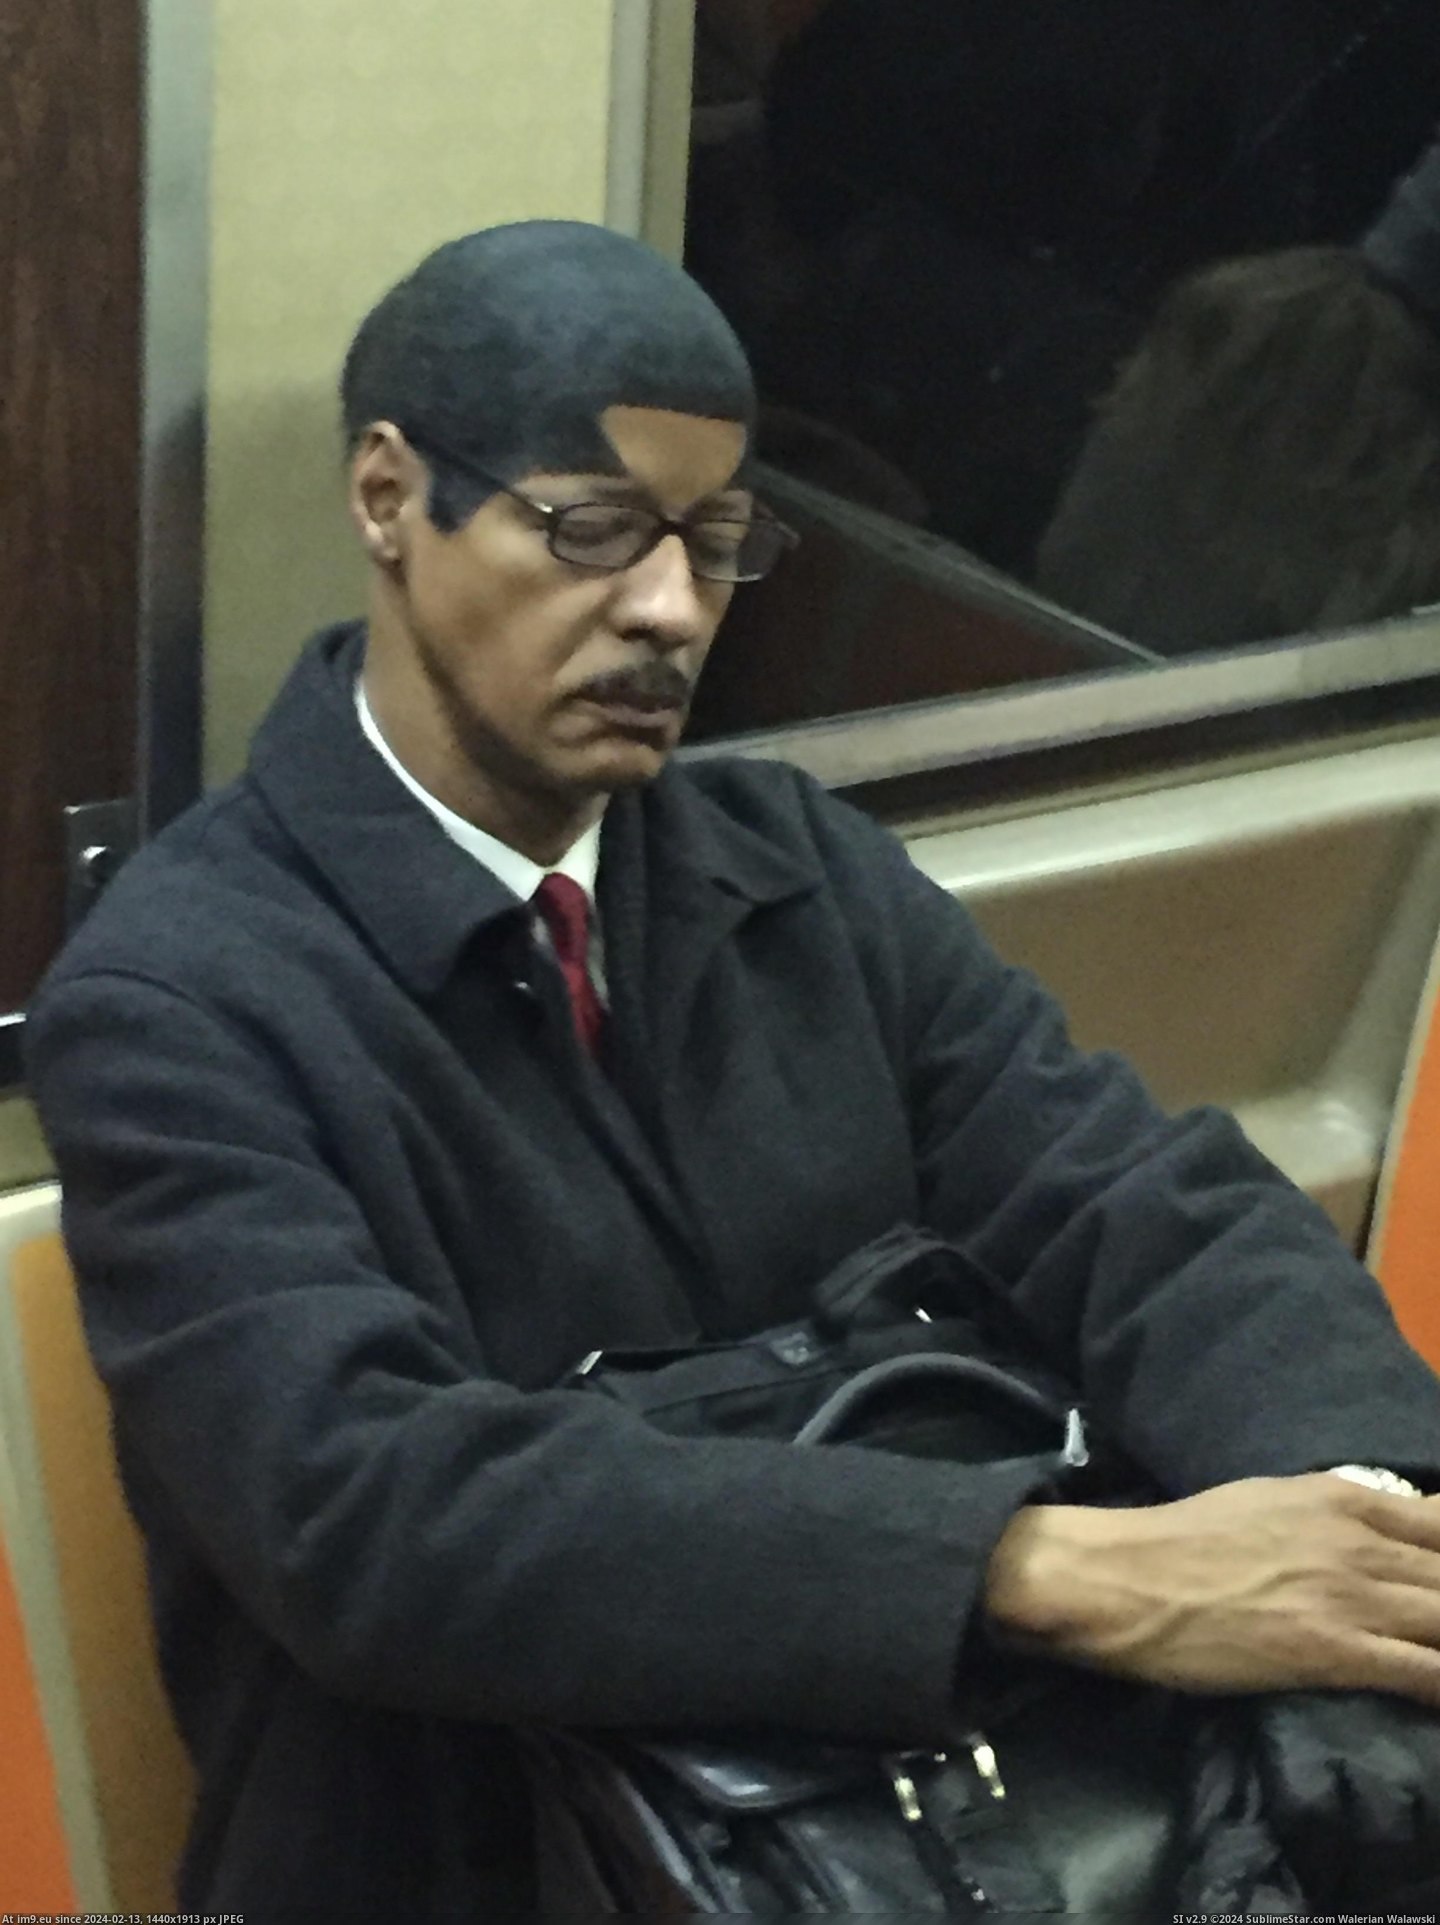 #Wtf #Guy #Sharpie #Nyc #Subway [Wtf] Guy with a Sharpie'd hairline on a NYC subway Pic. (Изображение из альбом My r/WTF favs))